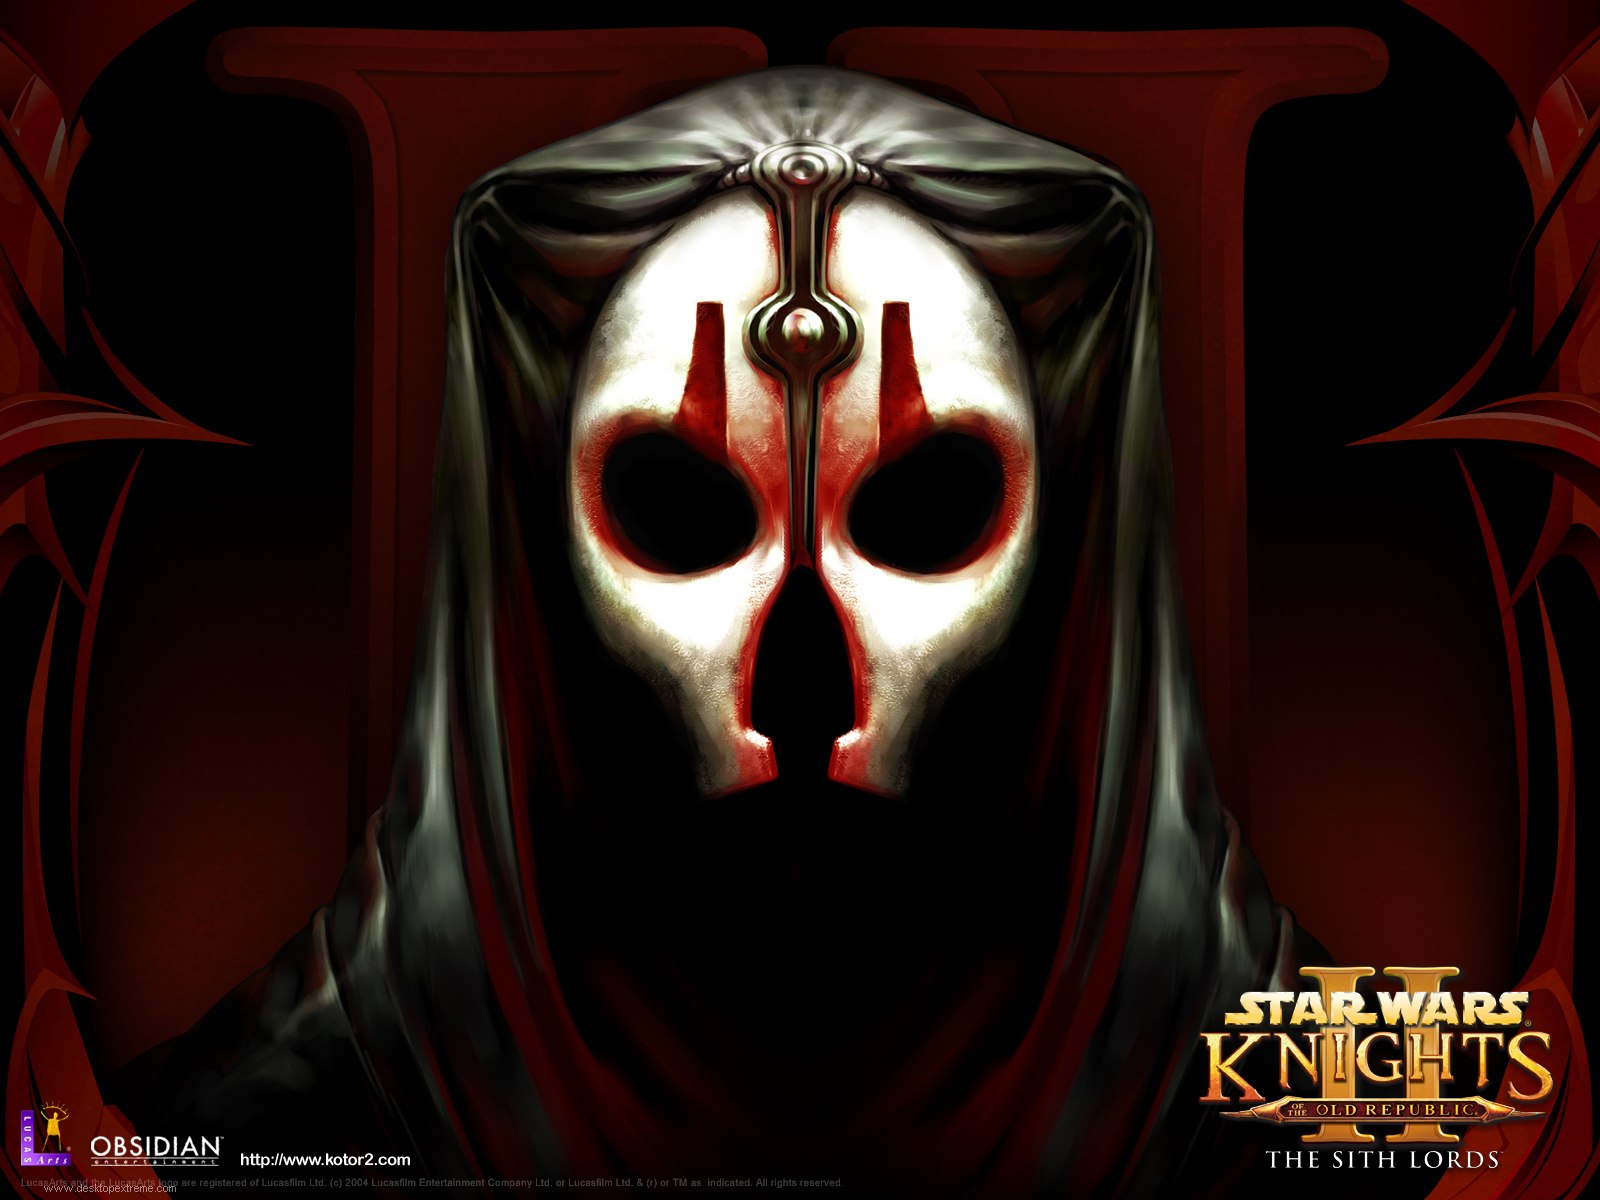 Video Game Star Wars Knights of the Old Republic II Wallpaper